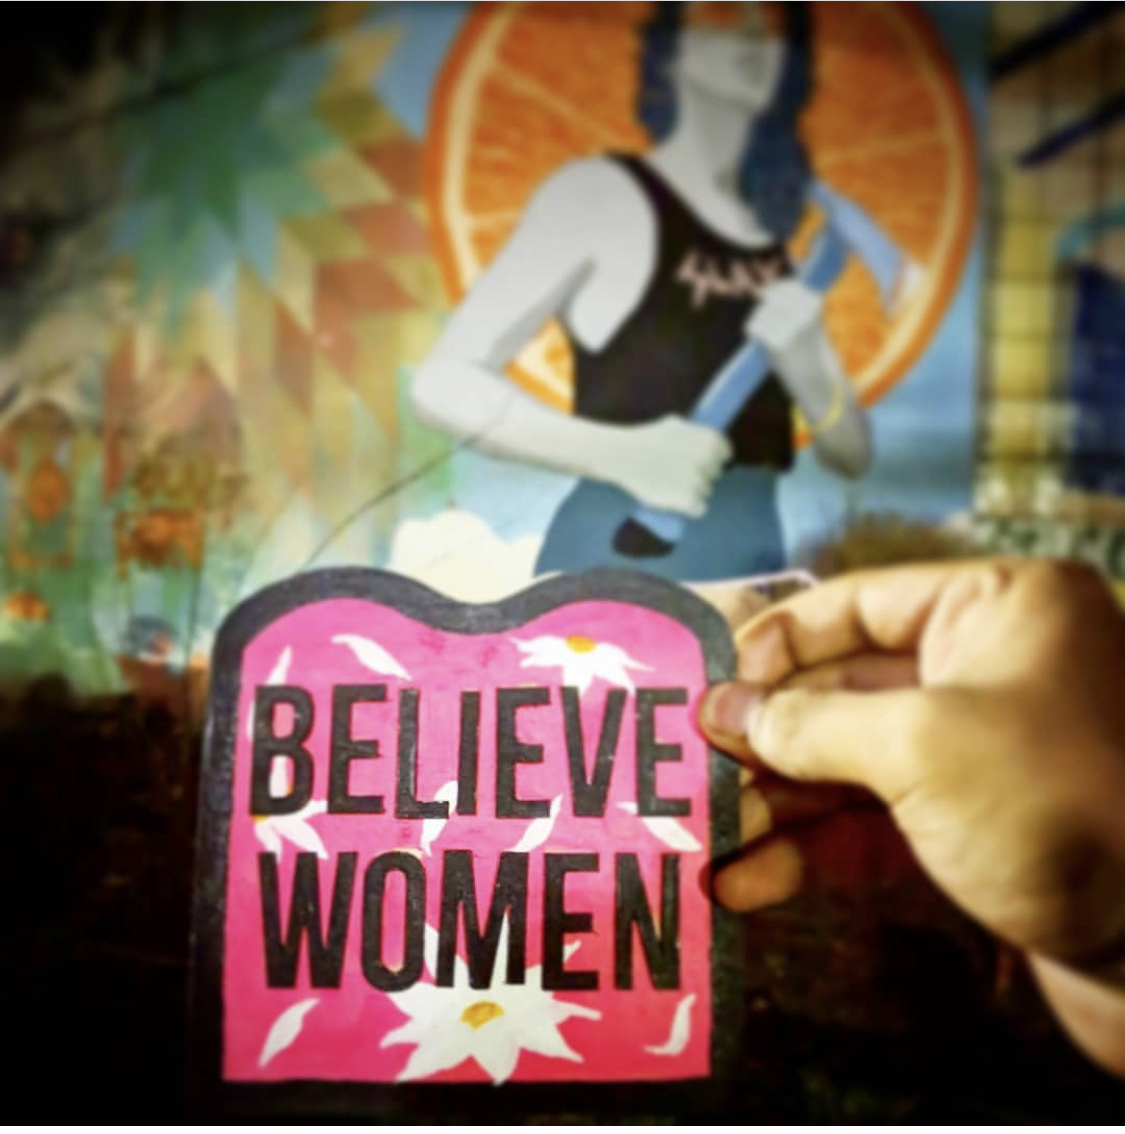  Street art toast “believe women” dropped at mural by @architoast  